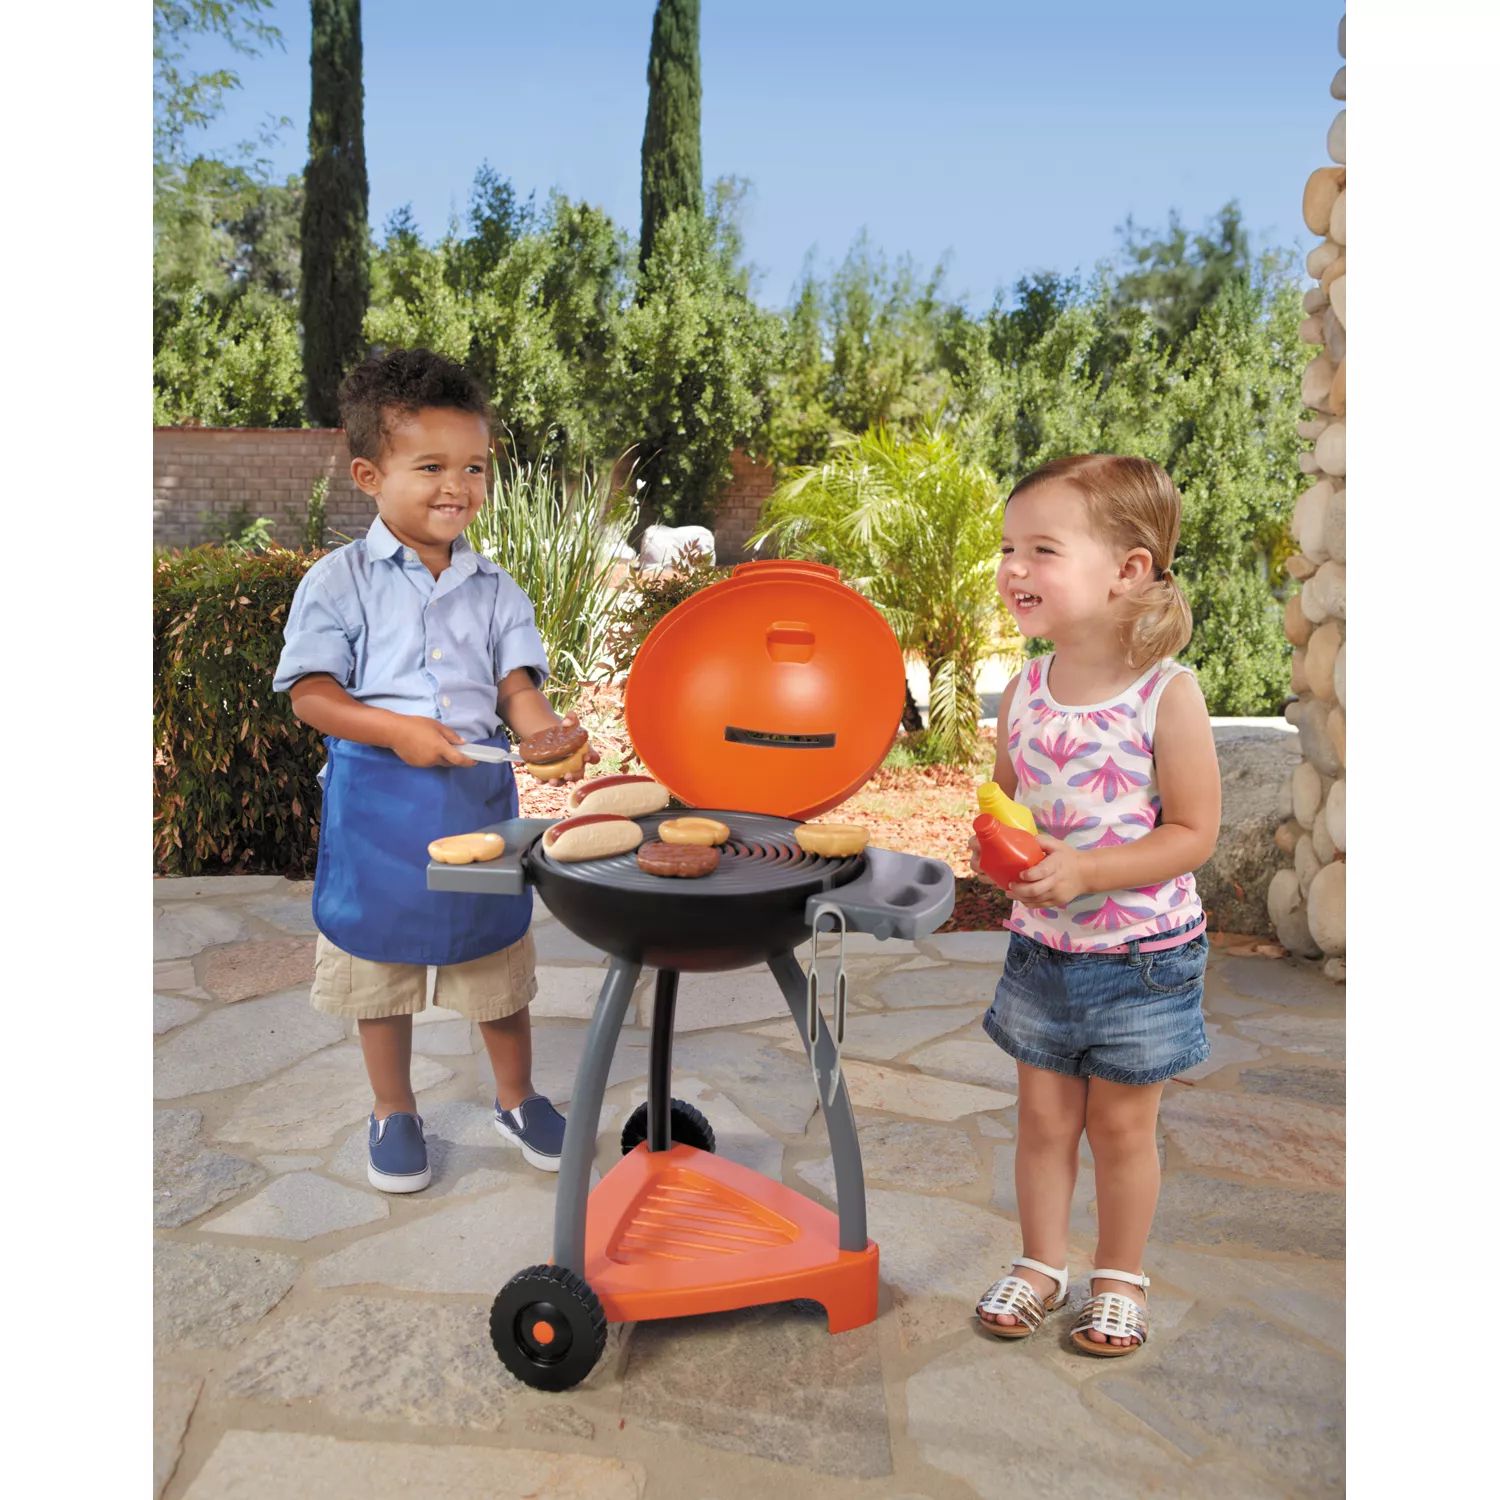 Little Tikes Sizzle 'n Serve Grill Little Tikes little tikes 172410e3 first slide pink